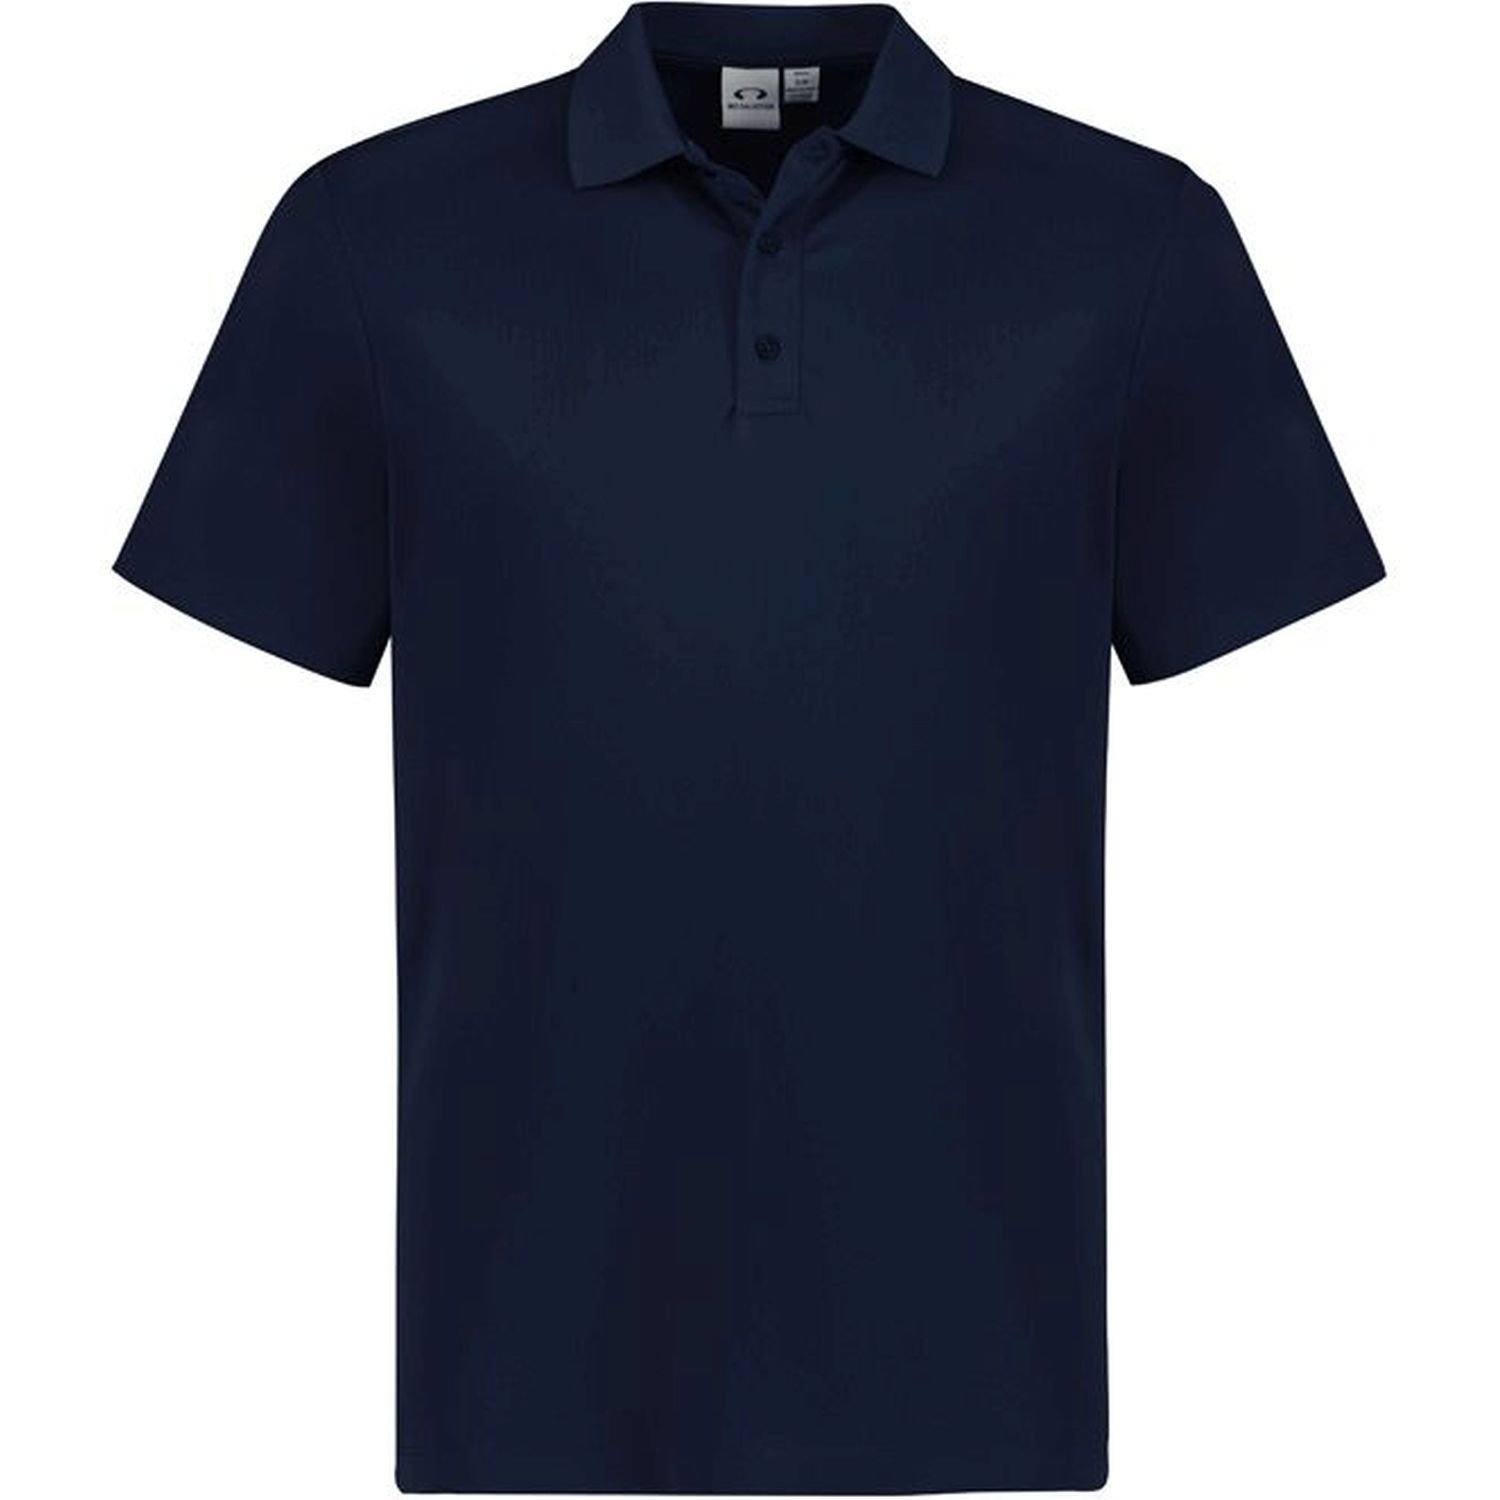 Action Mens's Polo Short Sleeve